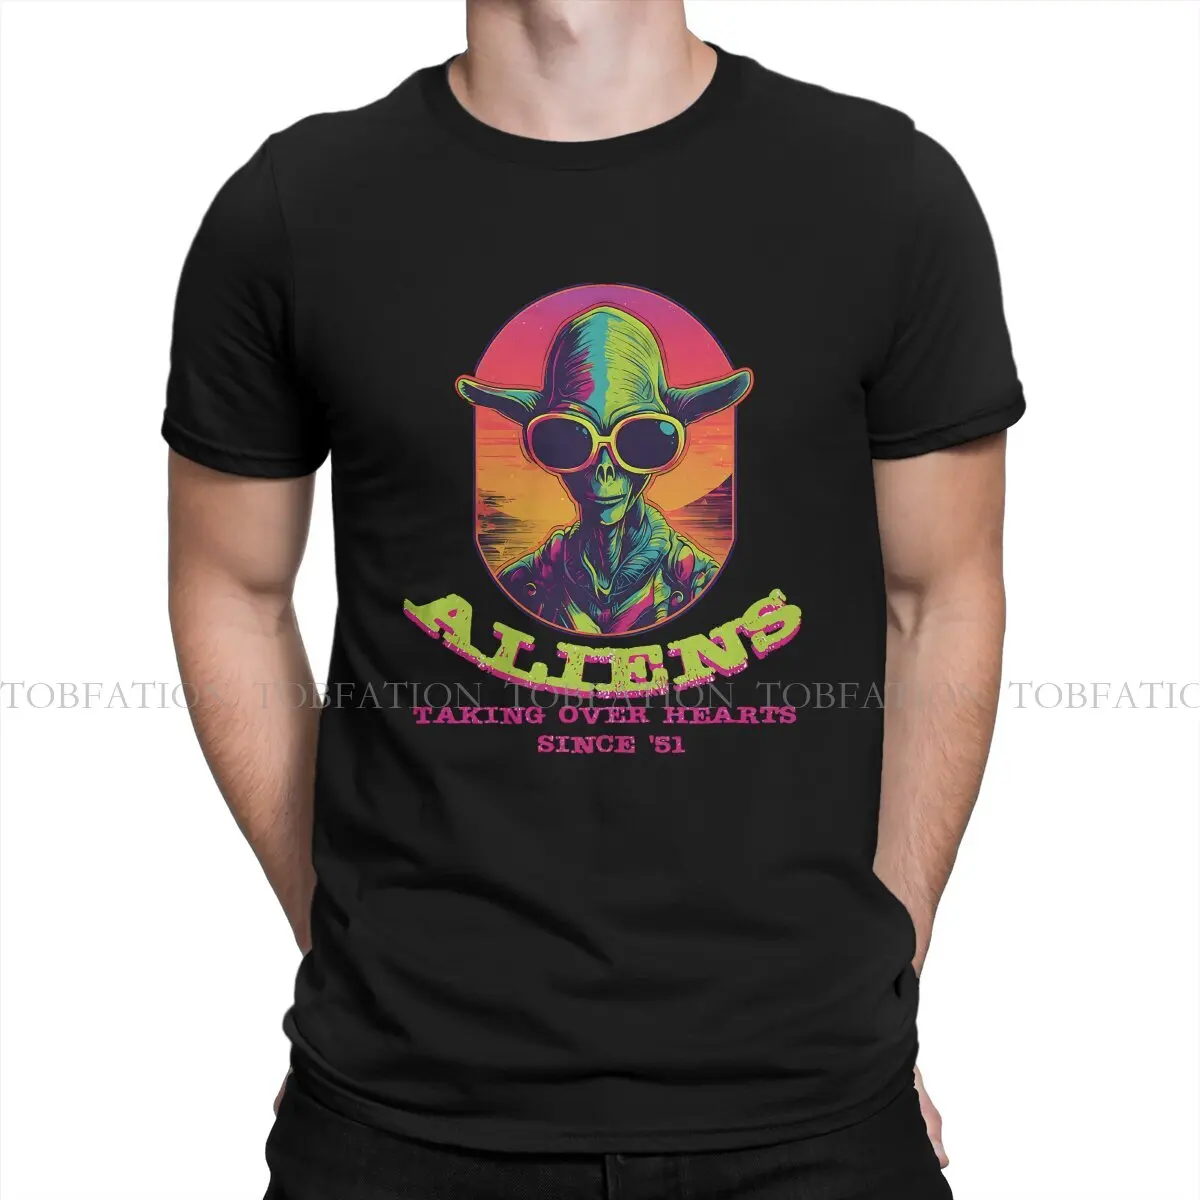 

Aliens Taking Over Earth Since '51 TShirt For Men Alien UFO Camisetas Style T Shirt 100% Cotton Soft Printed Loose